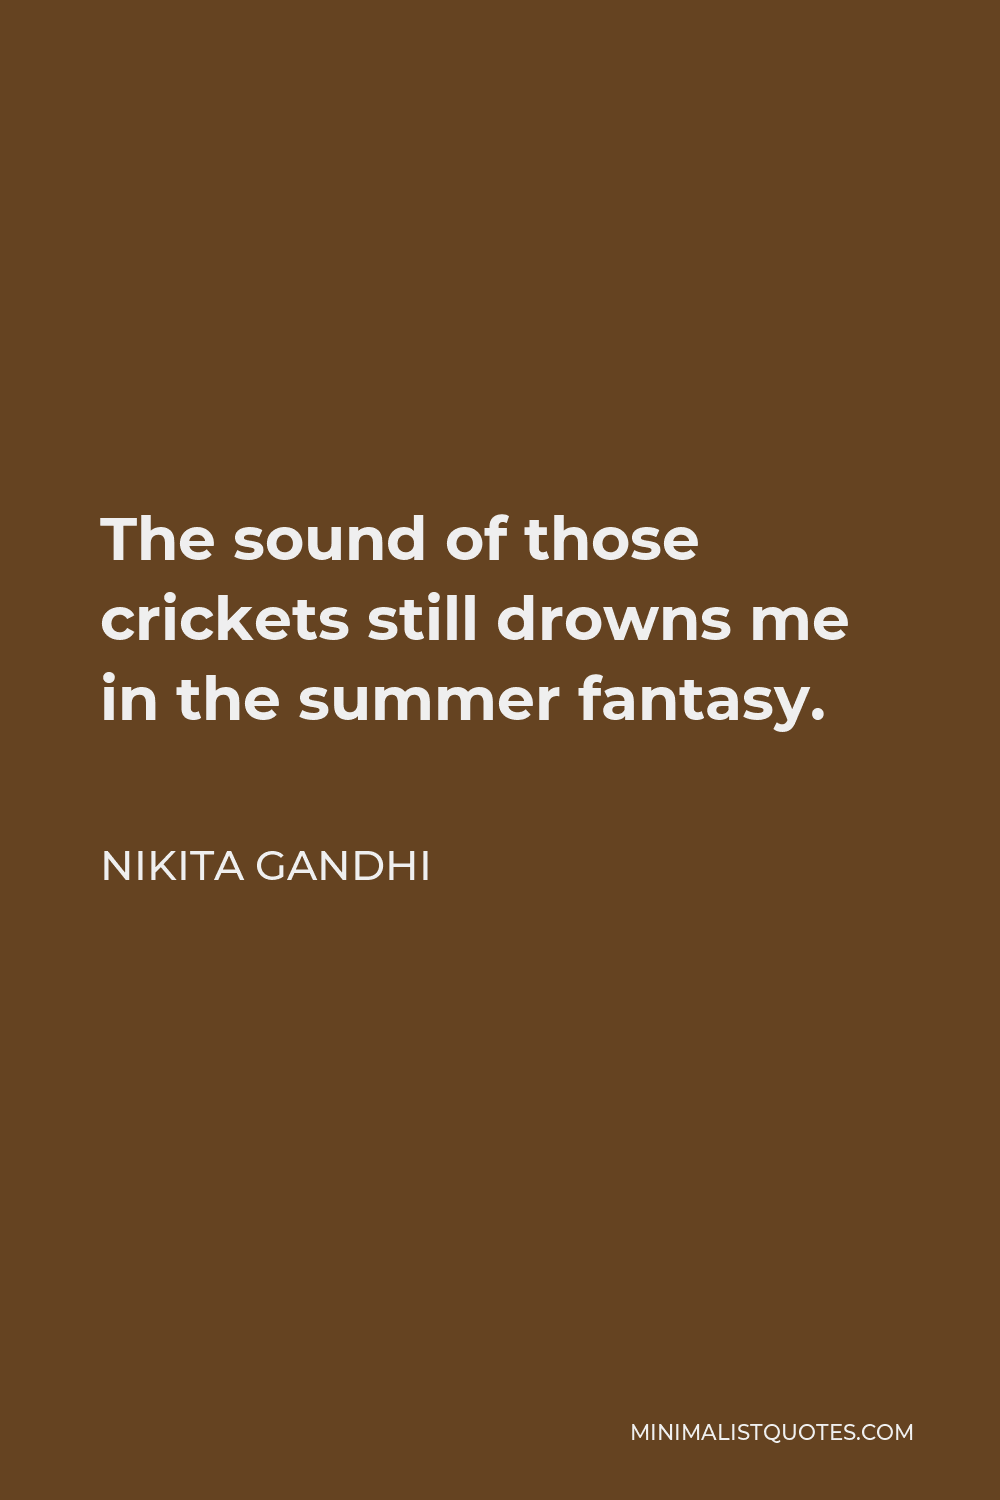 Nikita Gandhi Quote - The sound of those crickets still drowns me in the summer fantasy.